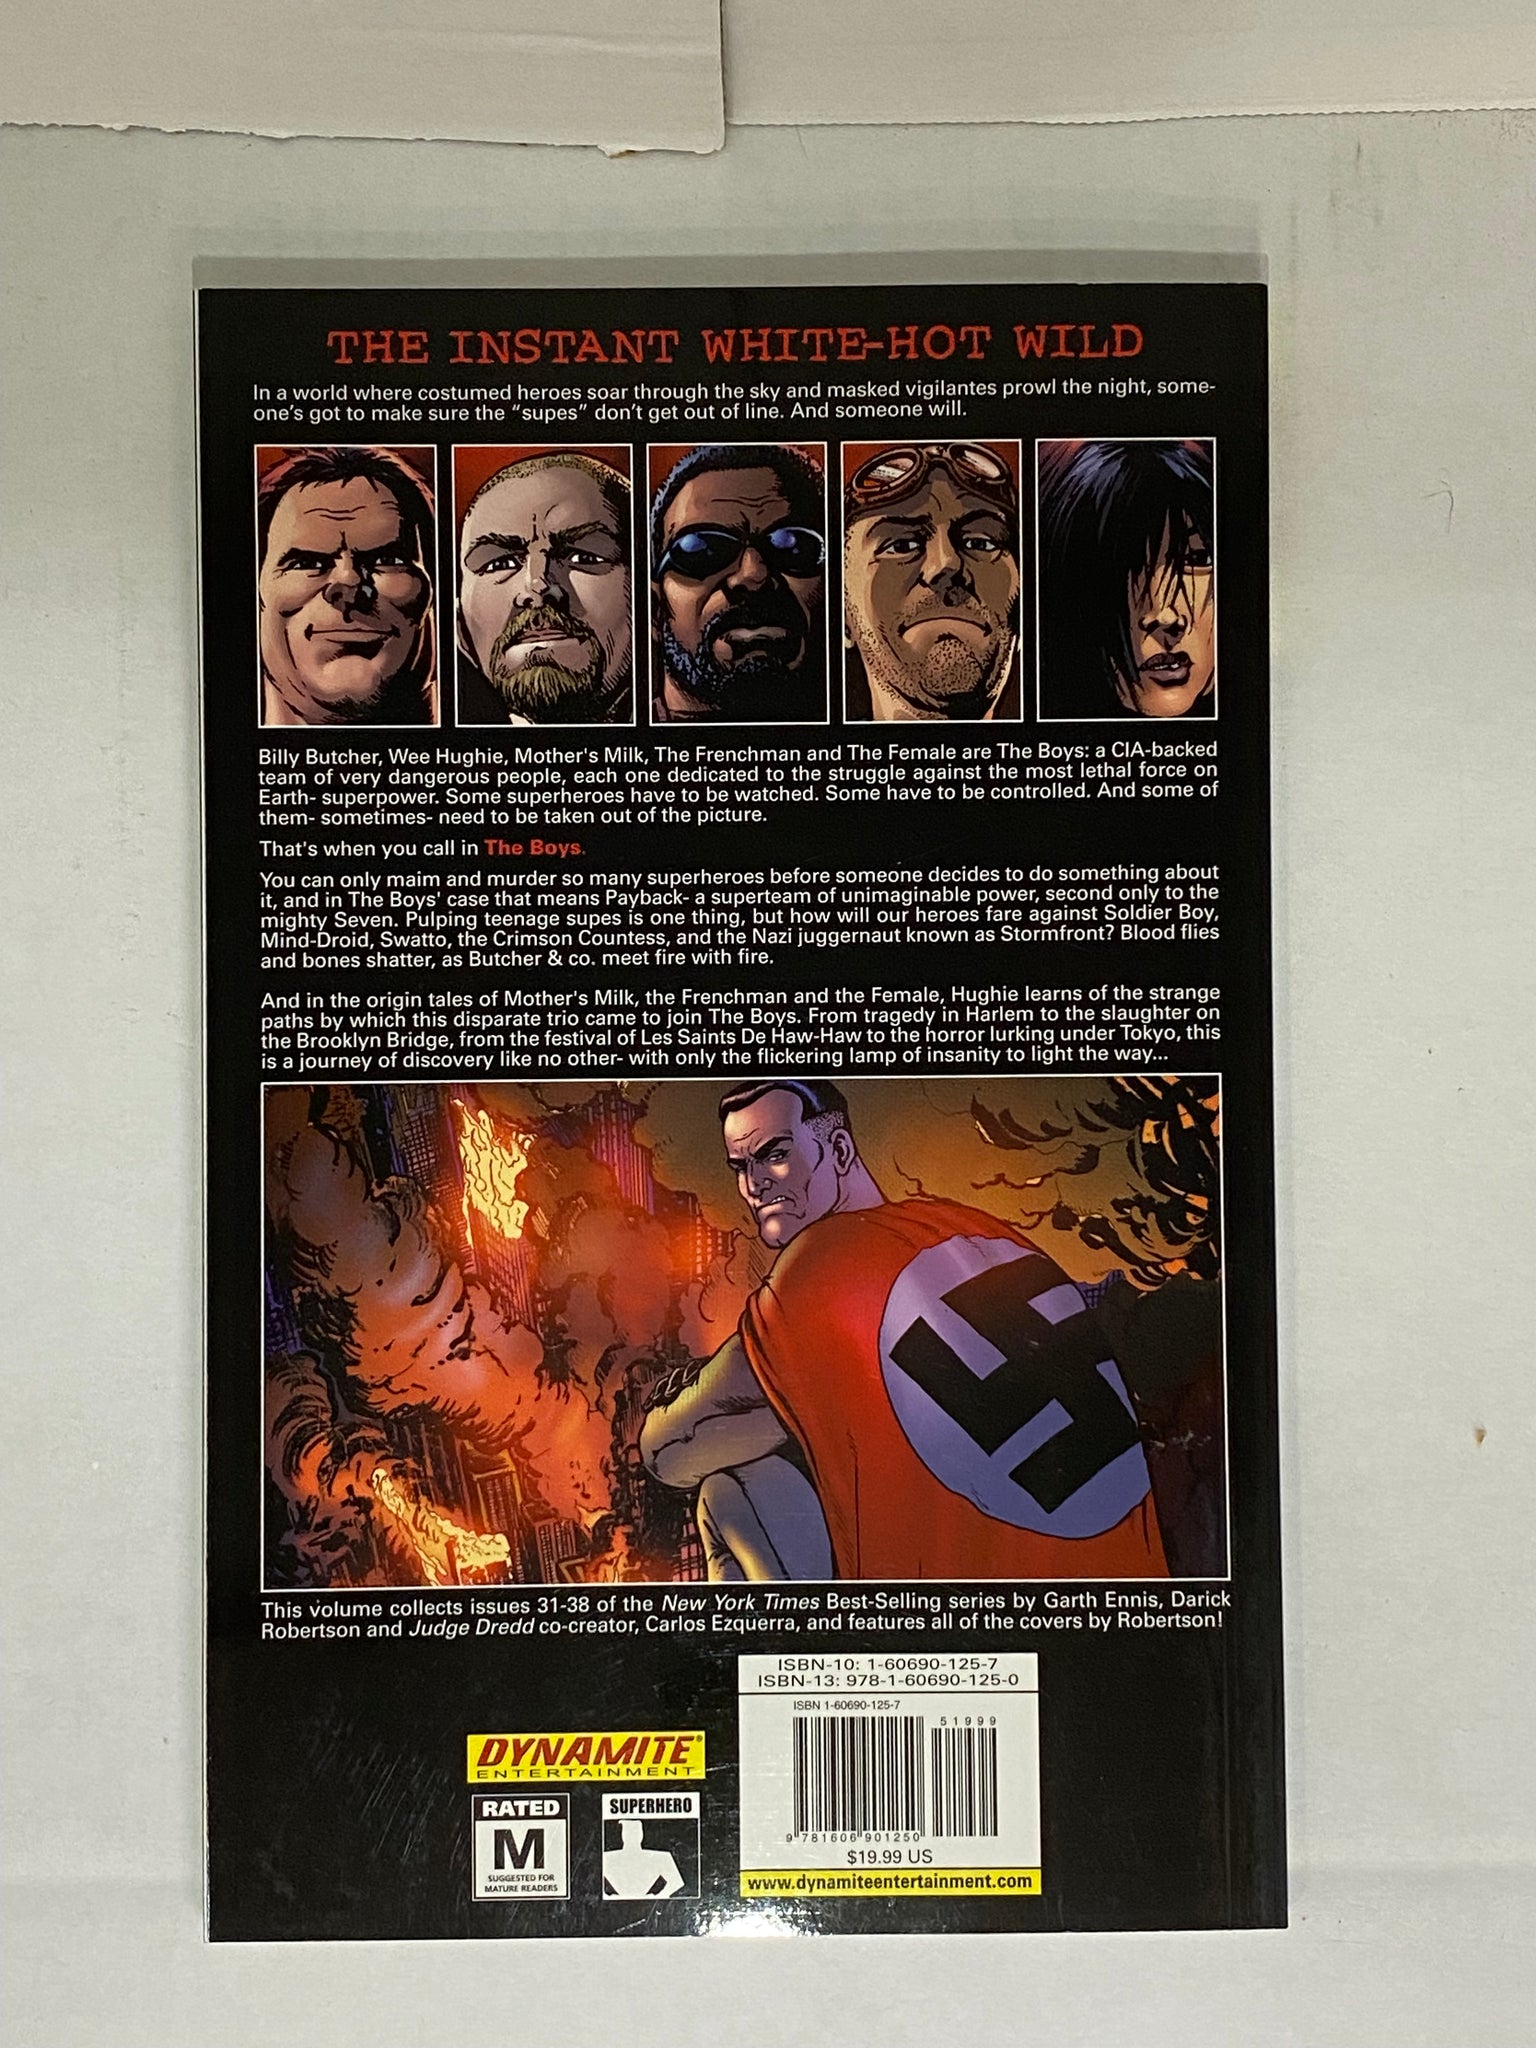 THE BOYS VOL. 6 TRADE PAPERBACK - NEW OPENED STOCK